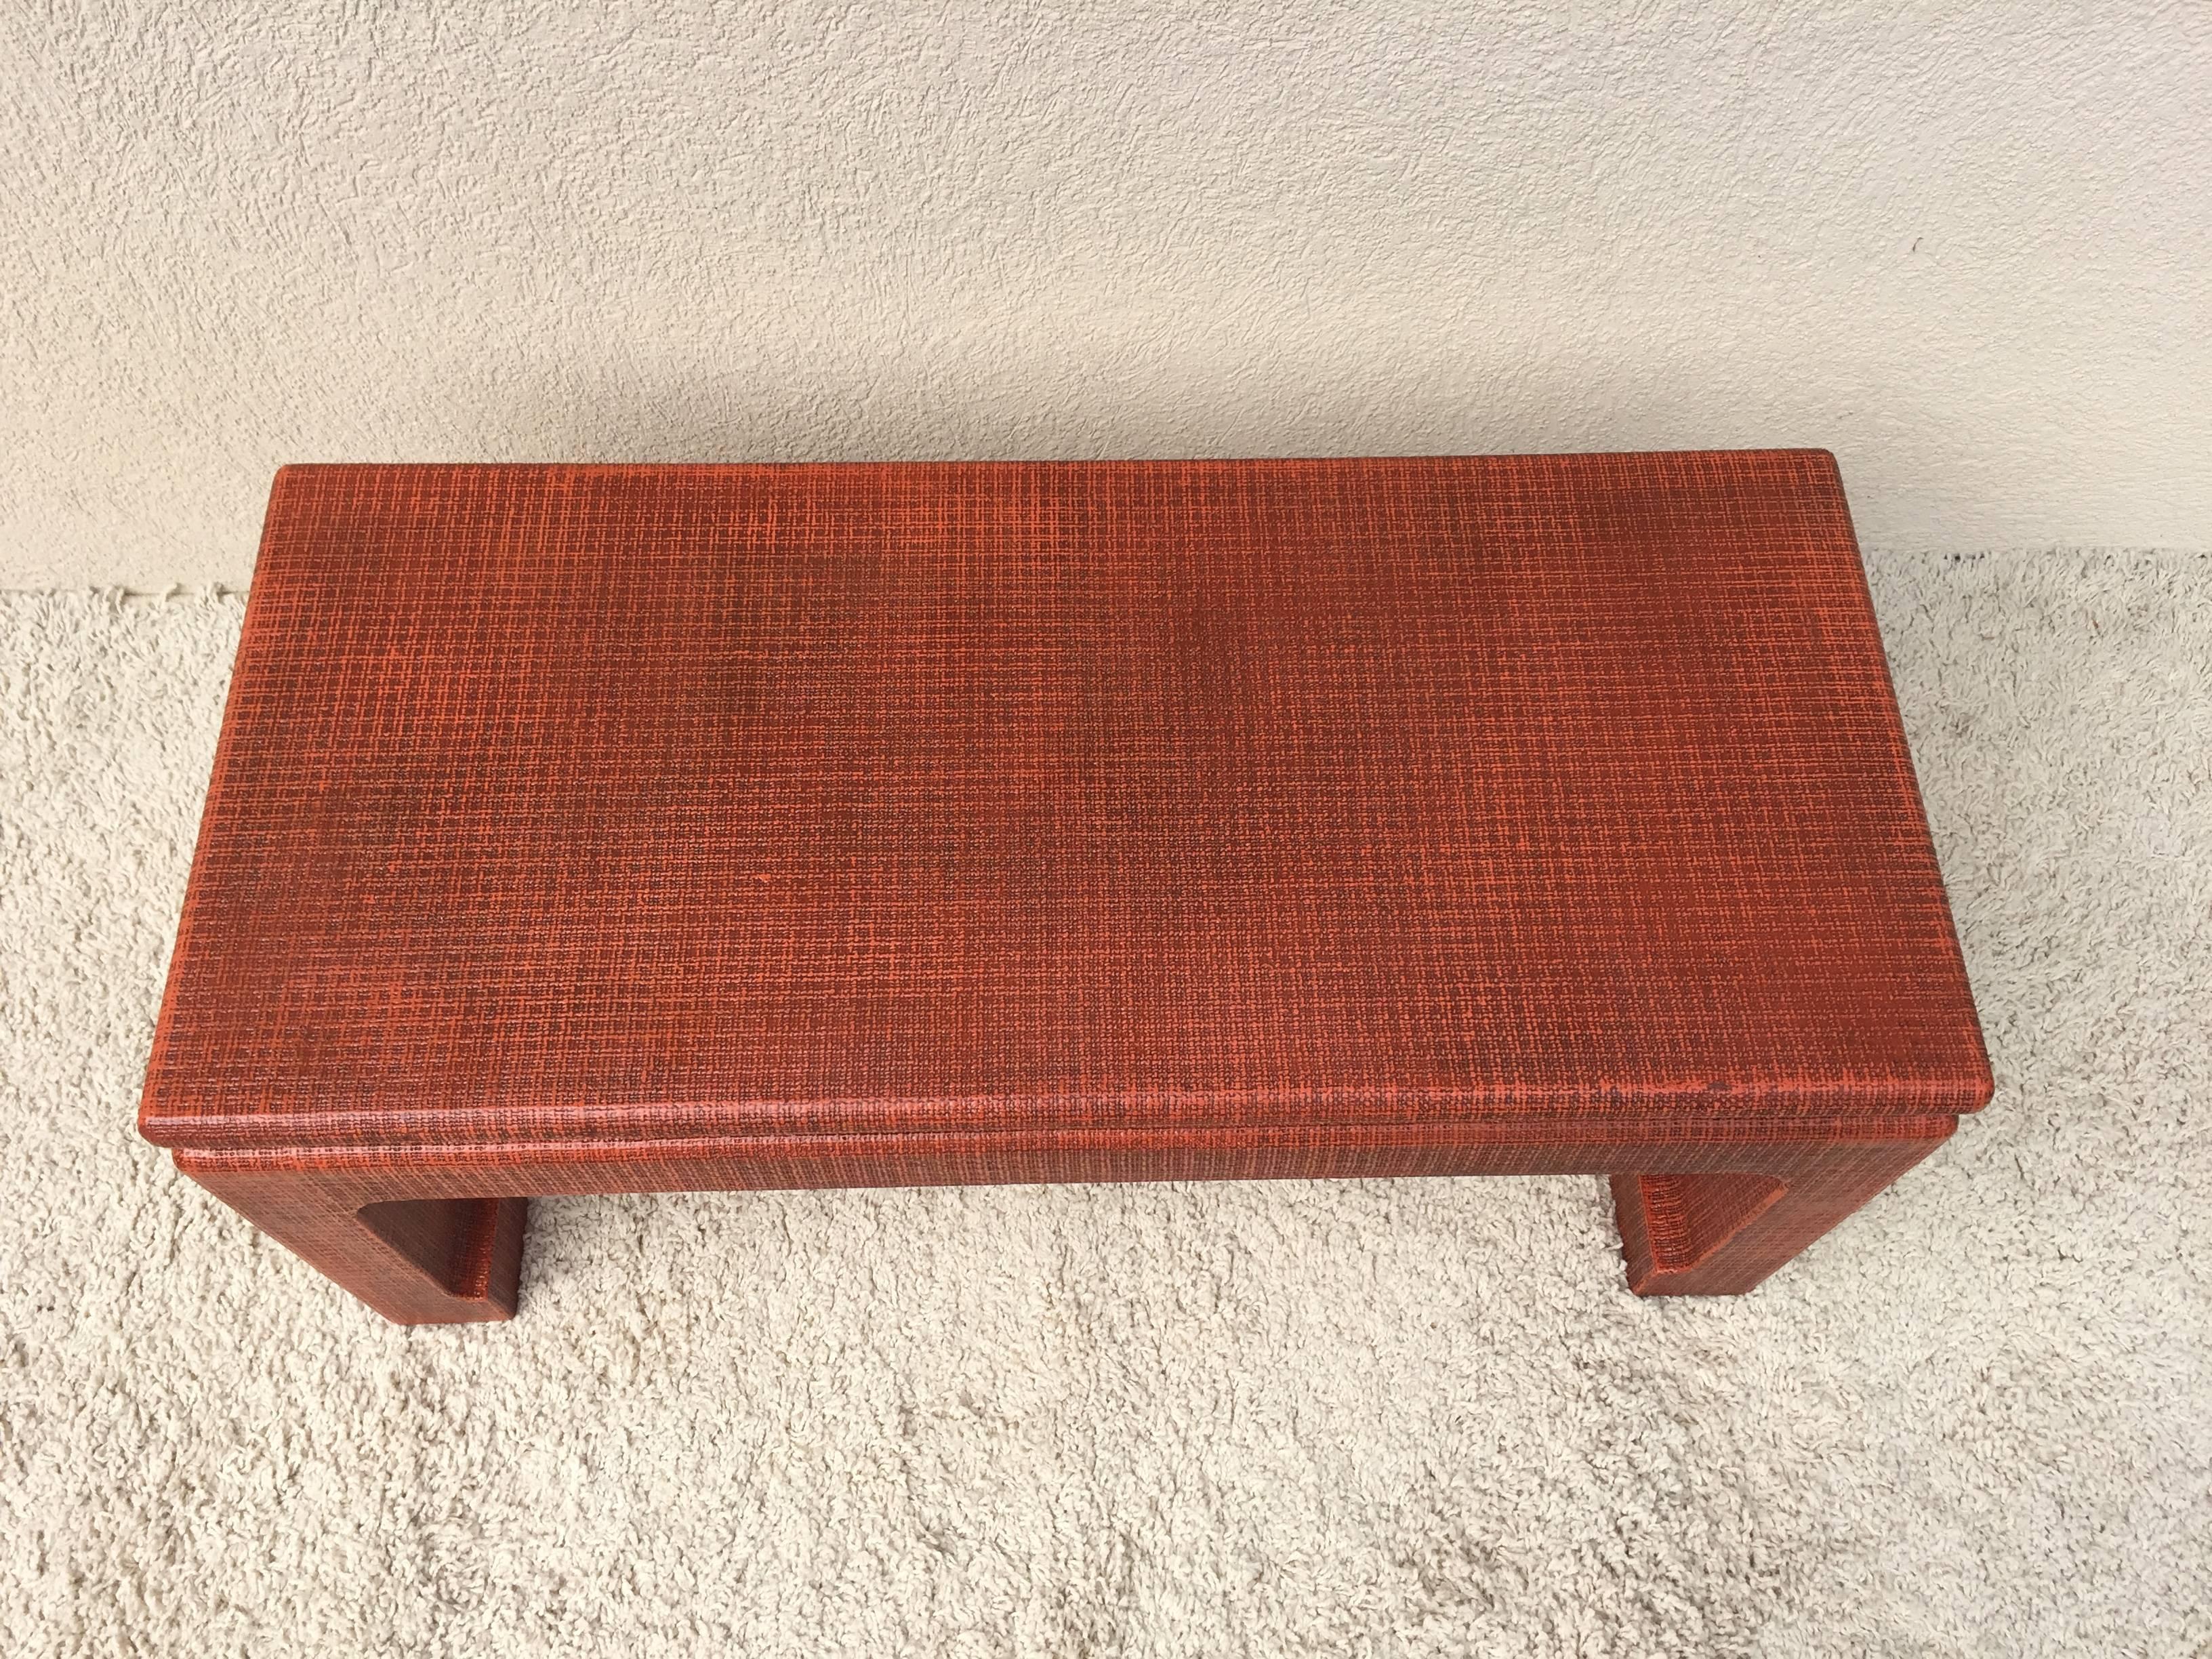 Karl Springer Style Grass Cloth Petite Table or Bench, Orange Lacquer In Excellent Condition For Sale In Westport, CT